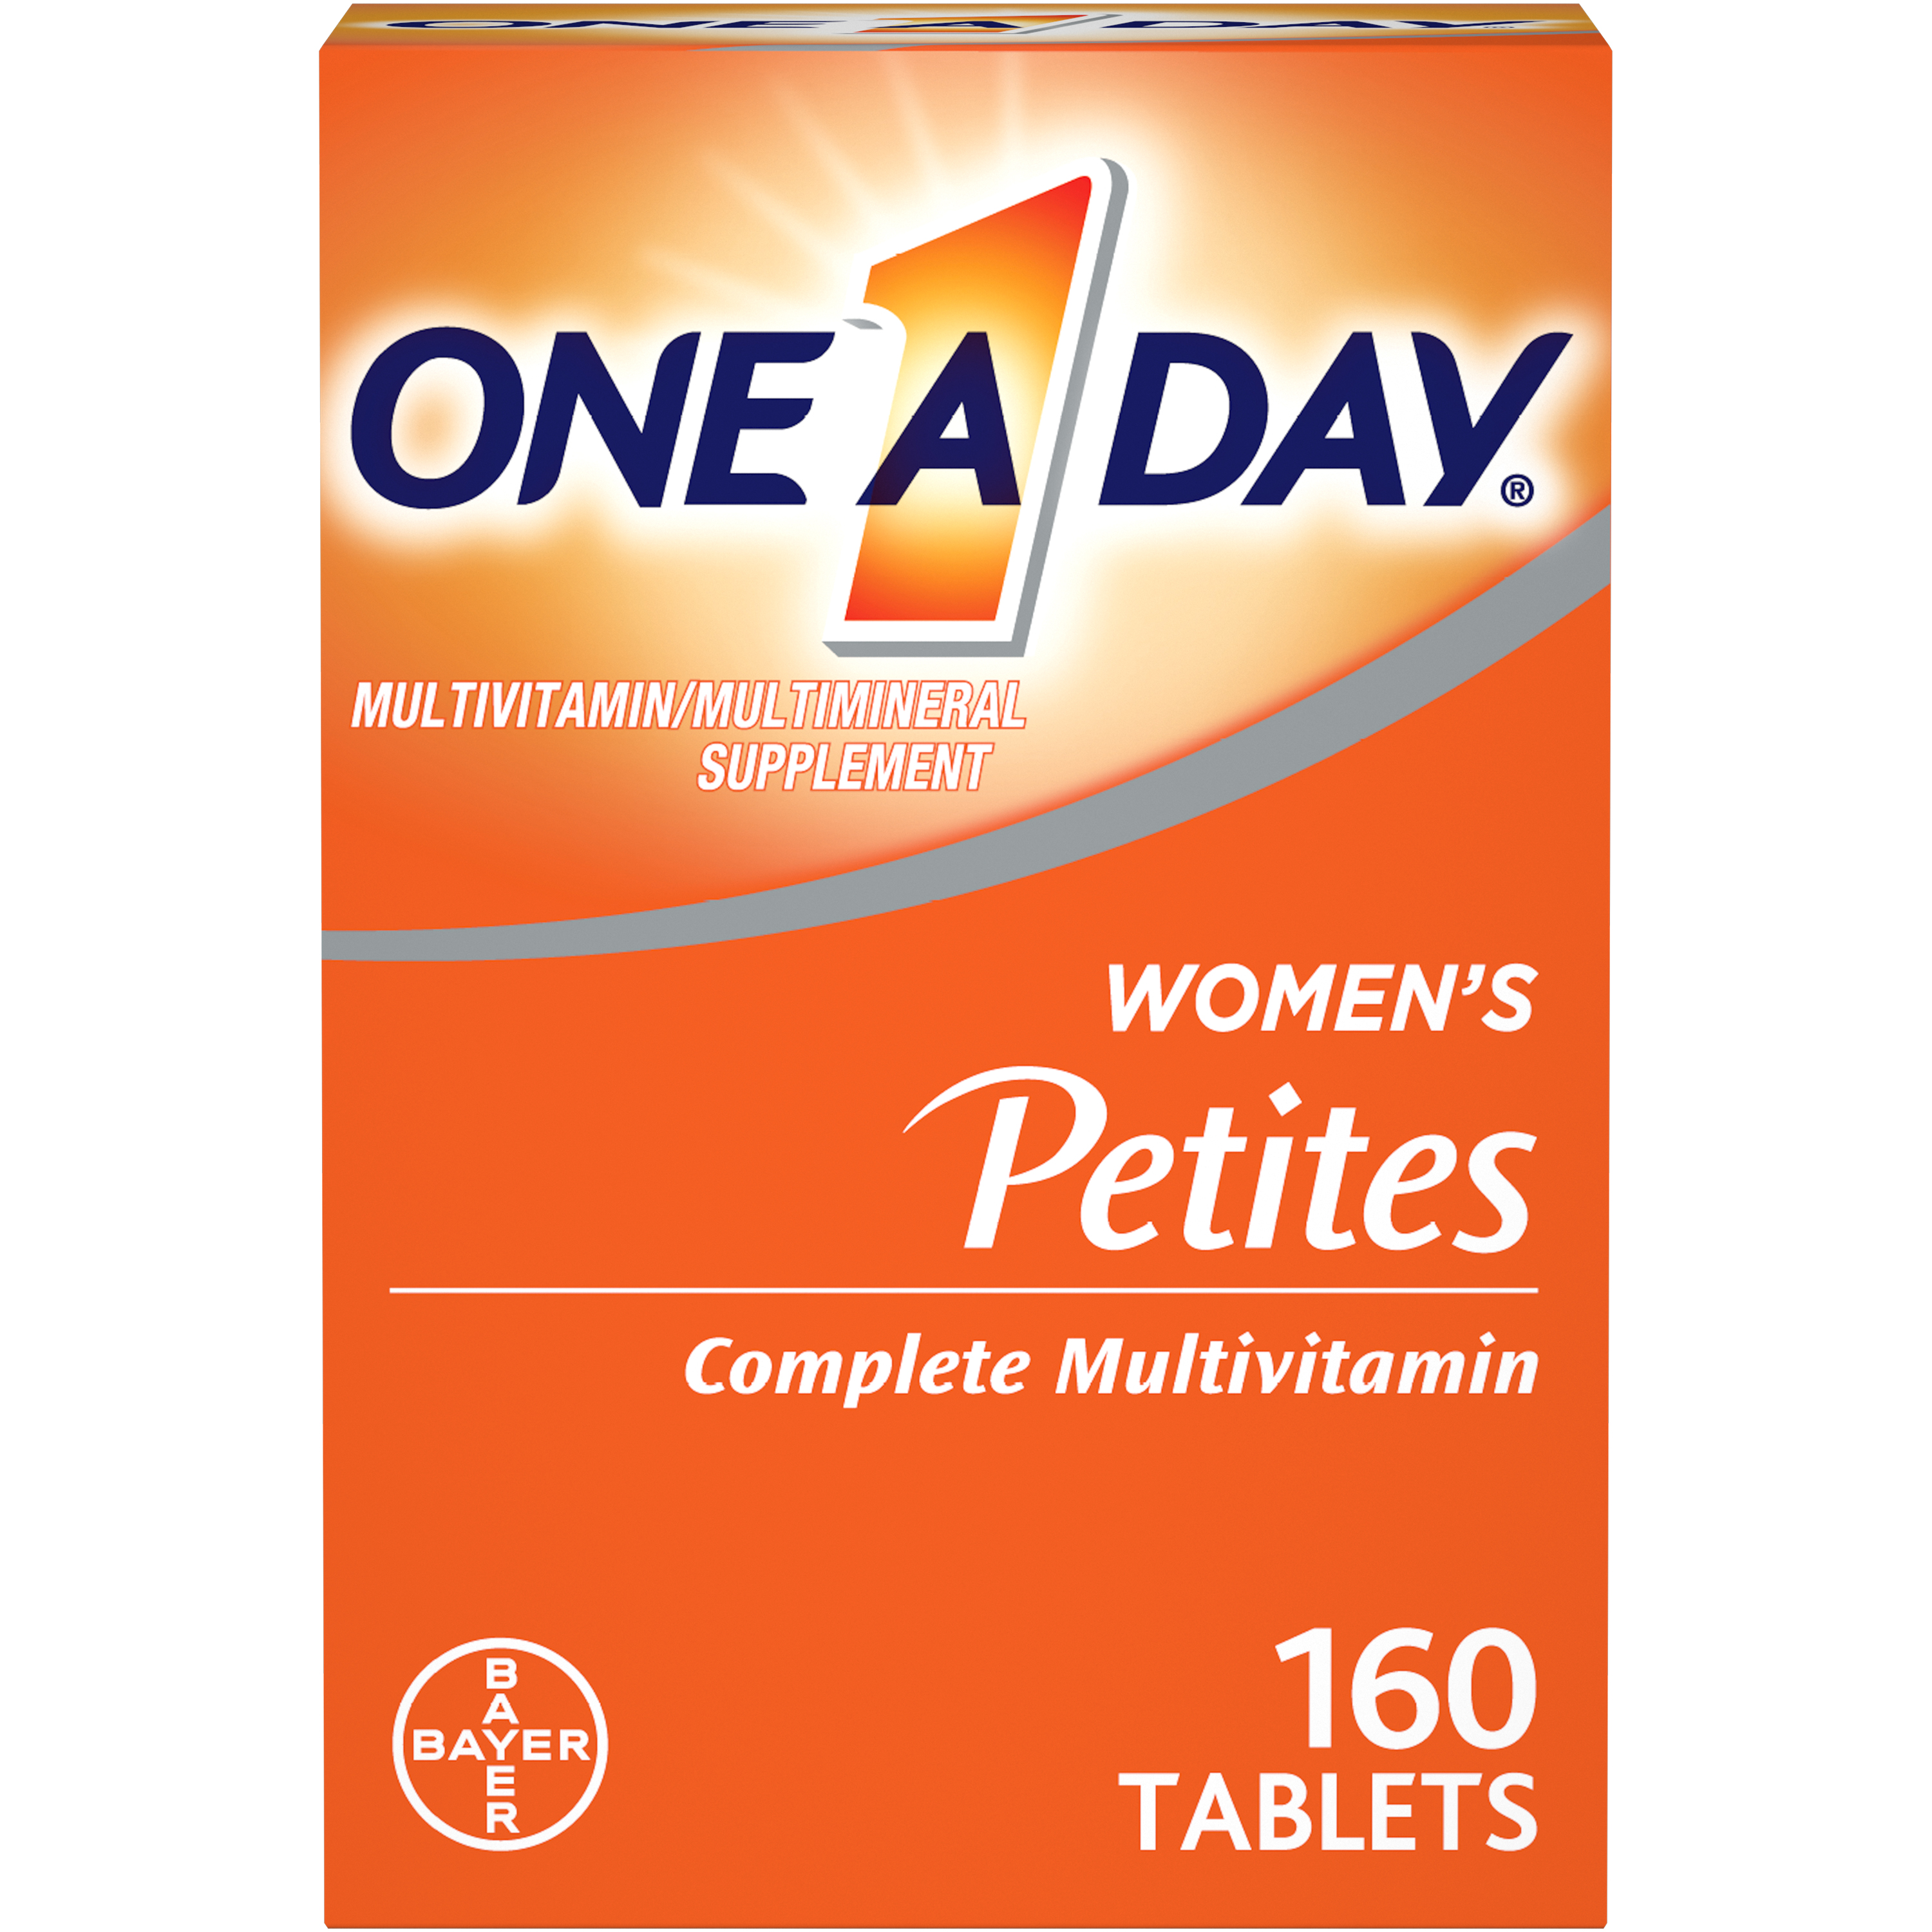 One A Day Women's Petites Tablets, Multivitamins for Women, 160 Ct - image 1 of 12